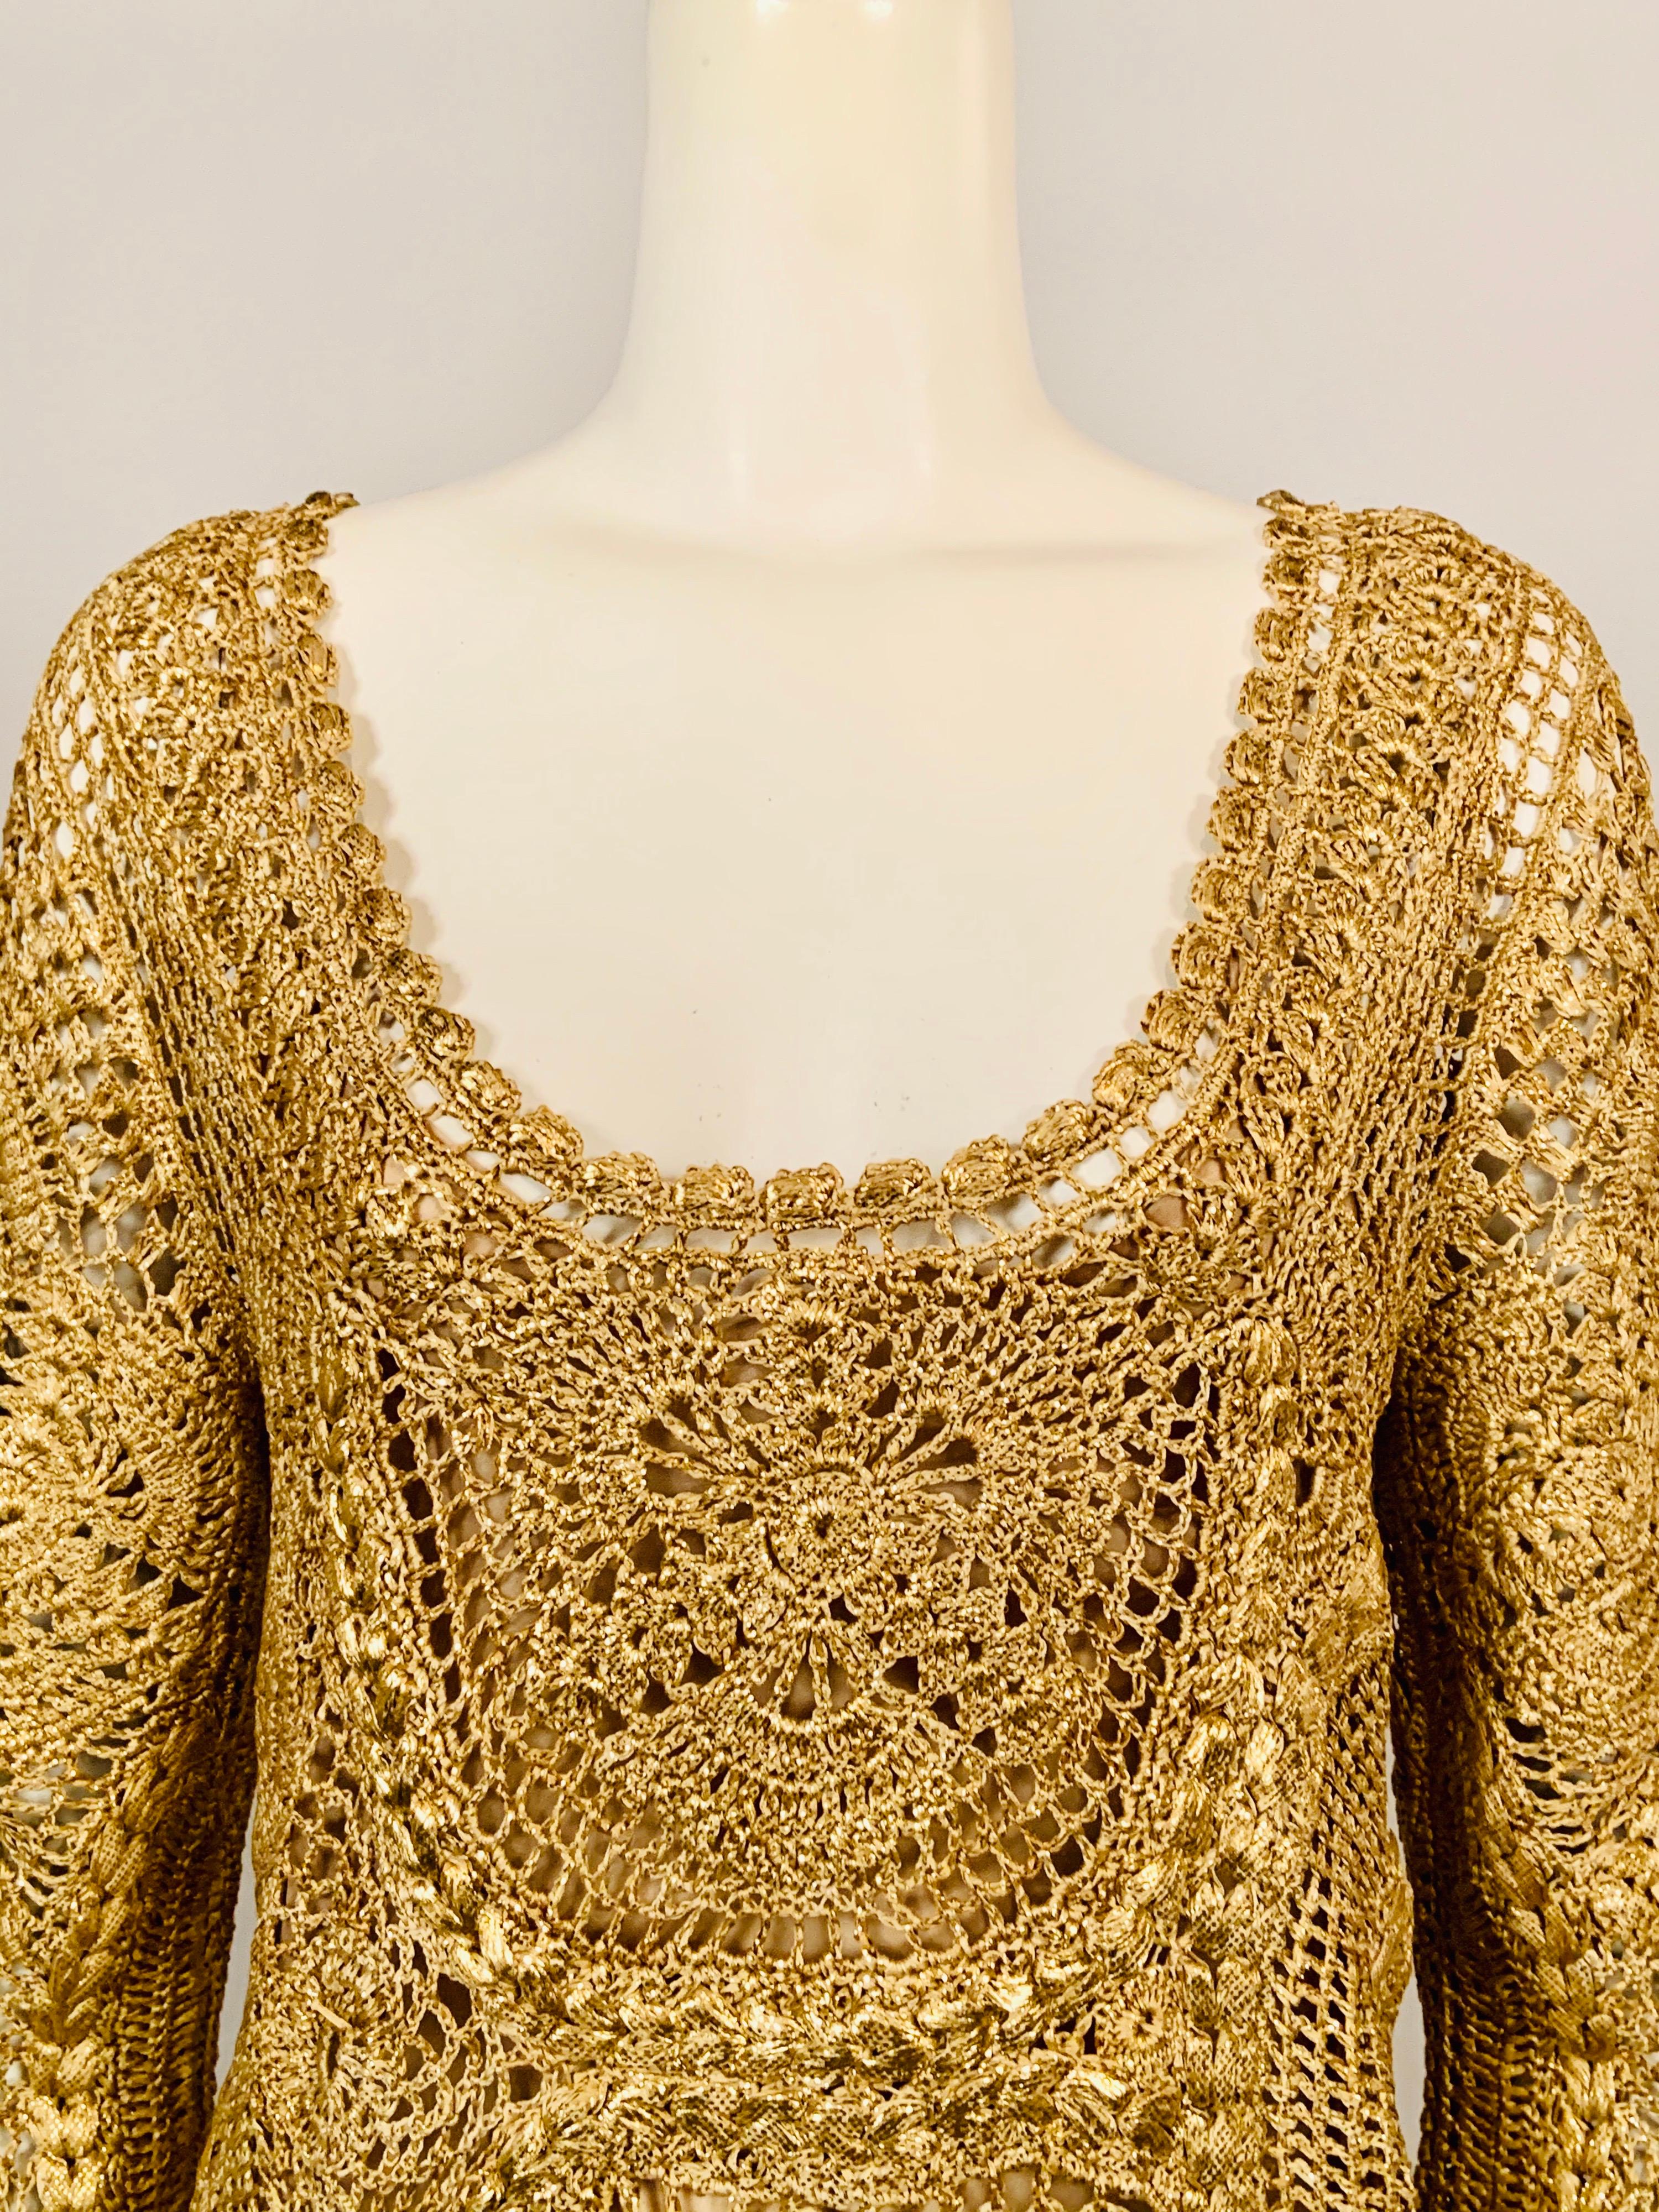 Oscar de la Renta designed a luxurious gold lacquered silk hand crocheted pullover tunic for the Spring 2010 collection. The top has a scoop neckline, three quarter length sleeves, and a scalloped hem.  It comes with a pale gold camisole made from